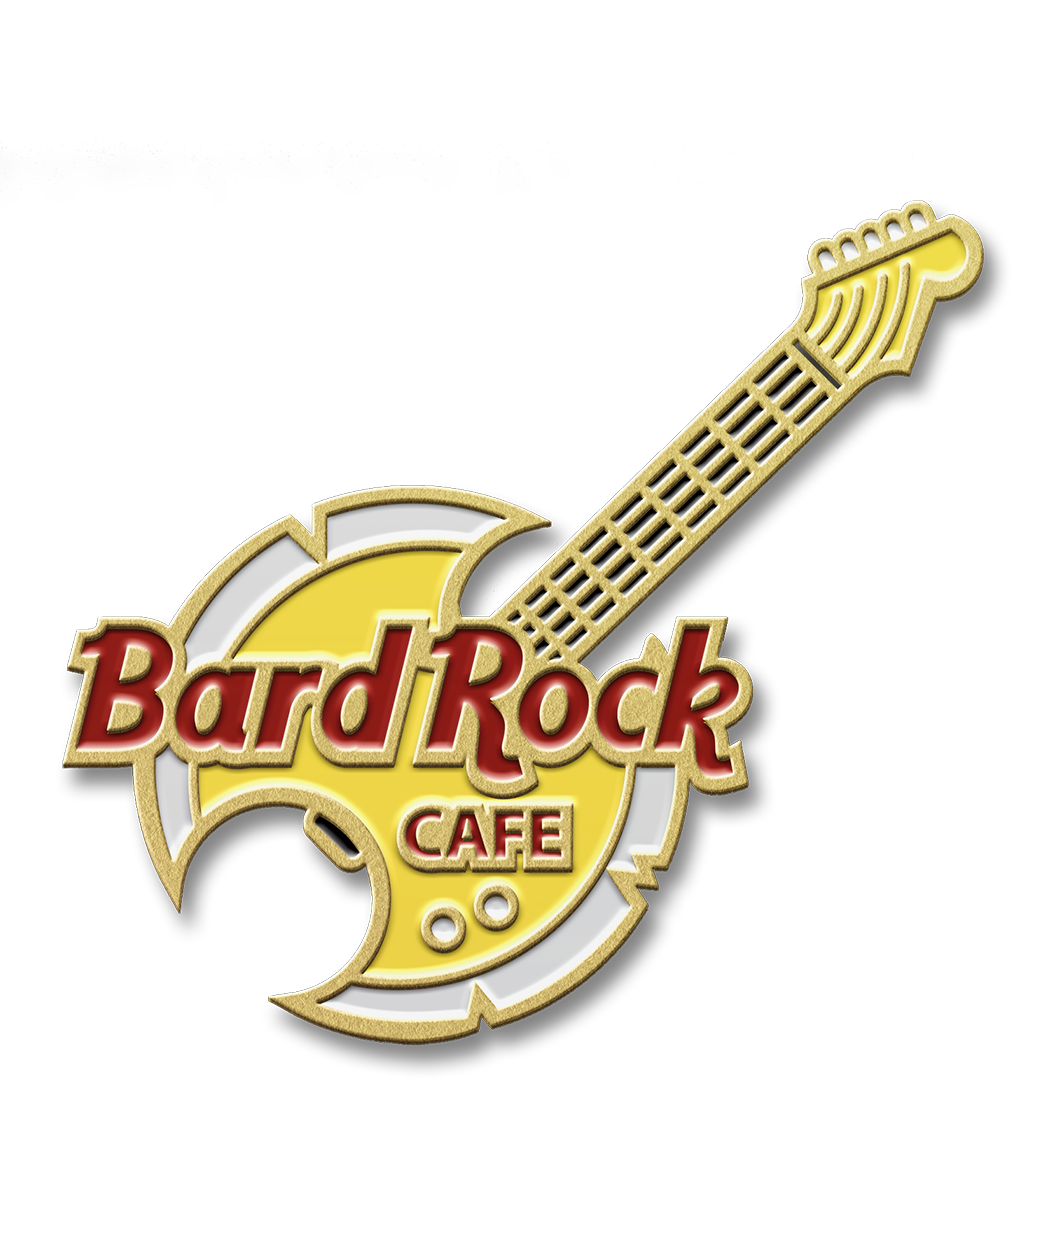 A gold plated enamel pin in the shape of a guitar with an axe head for its body filled with yellow enamel. The words Bard Rock cafe in burgundy on the guitar body in the same style as the Hard Rock Cafe.